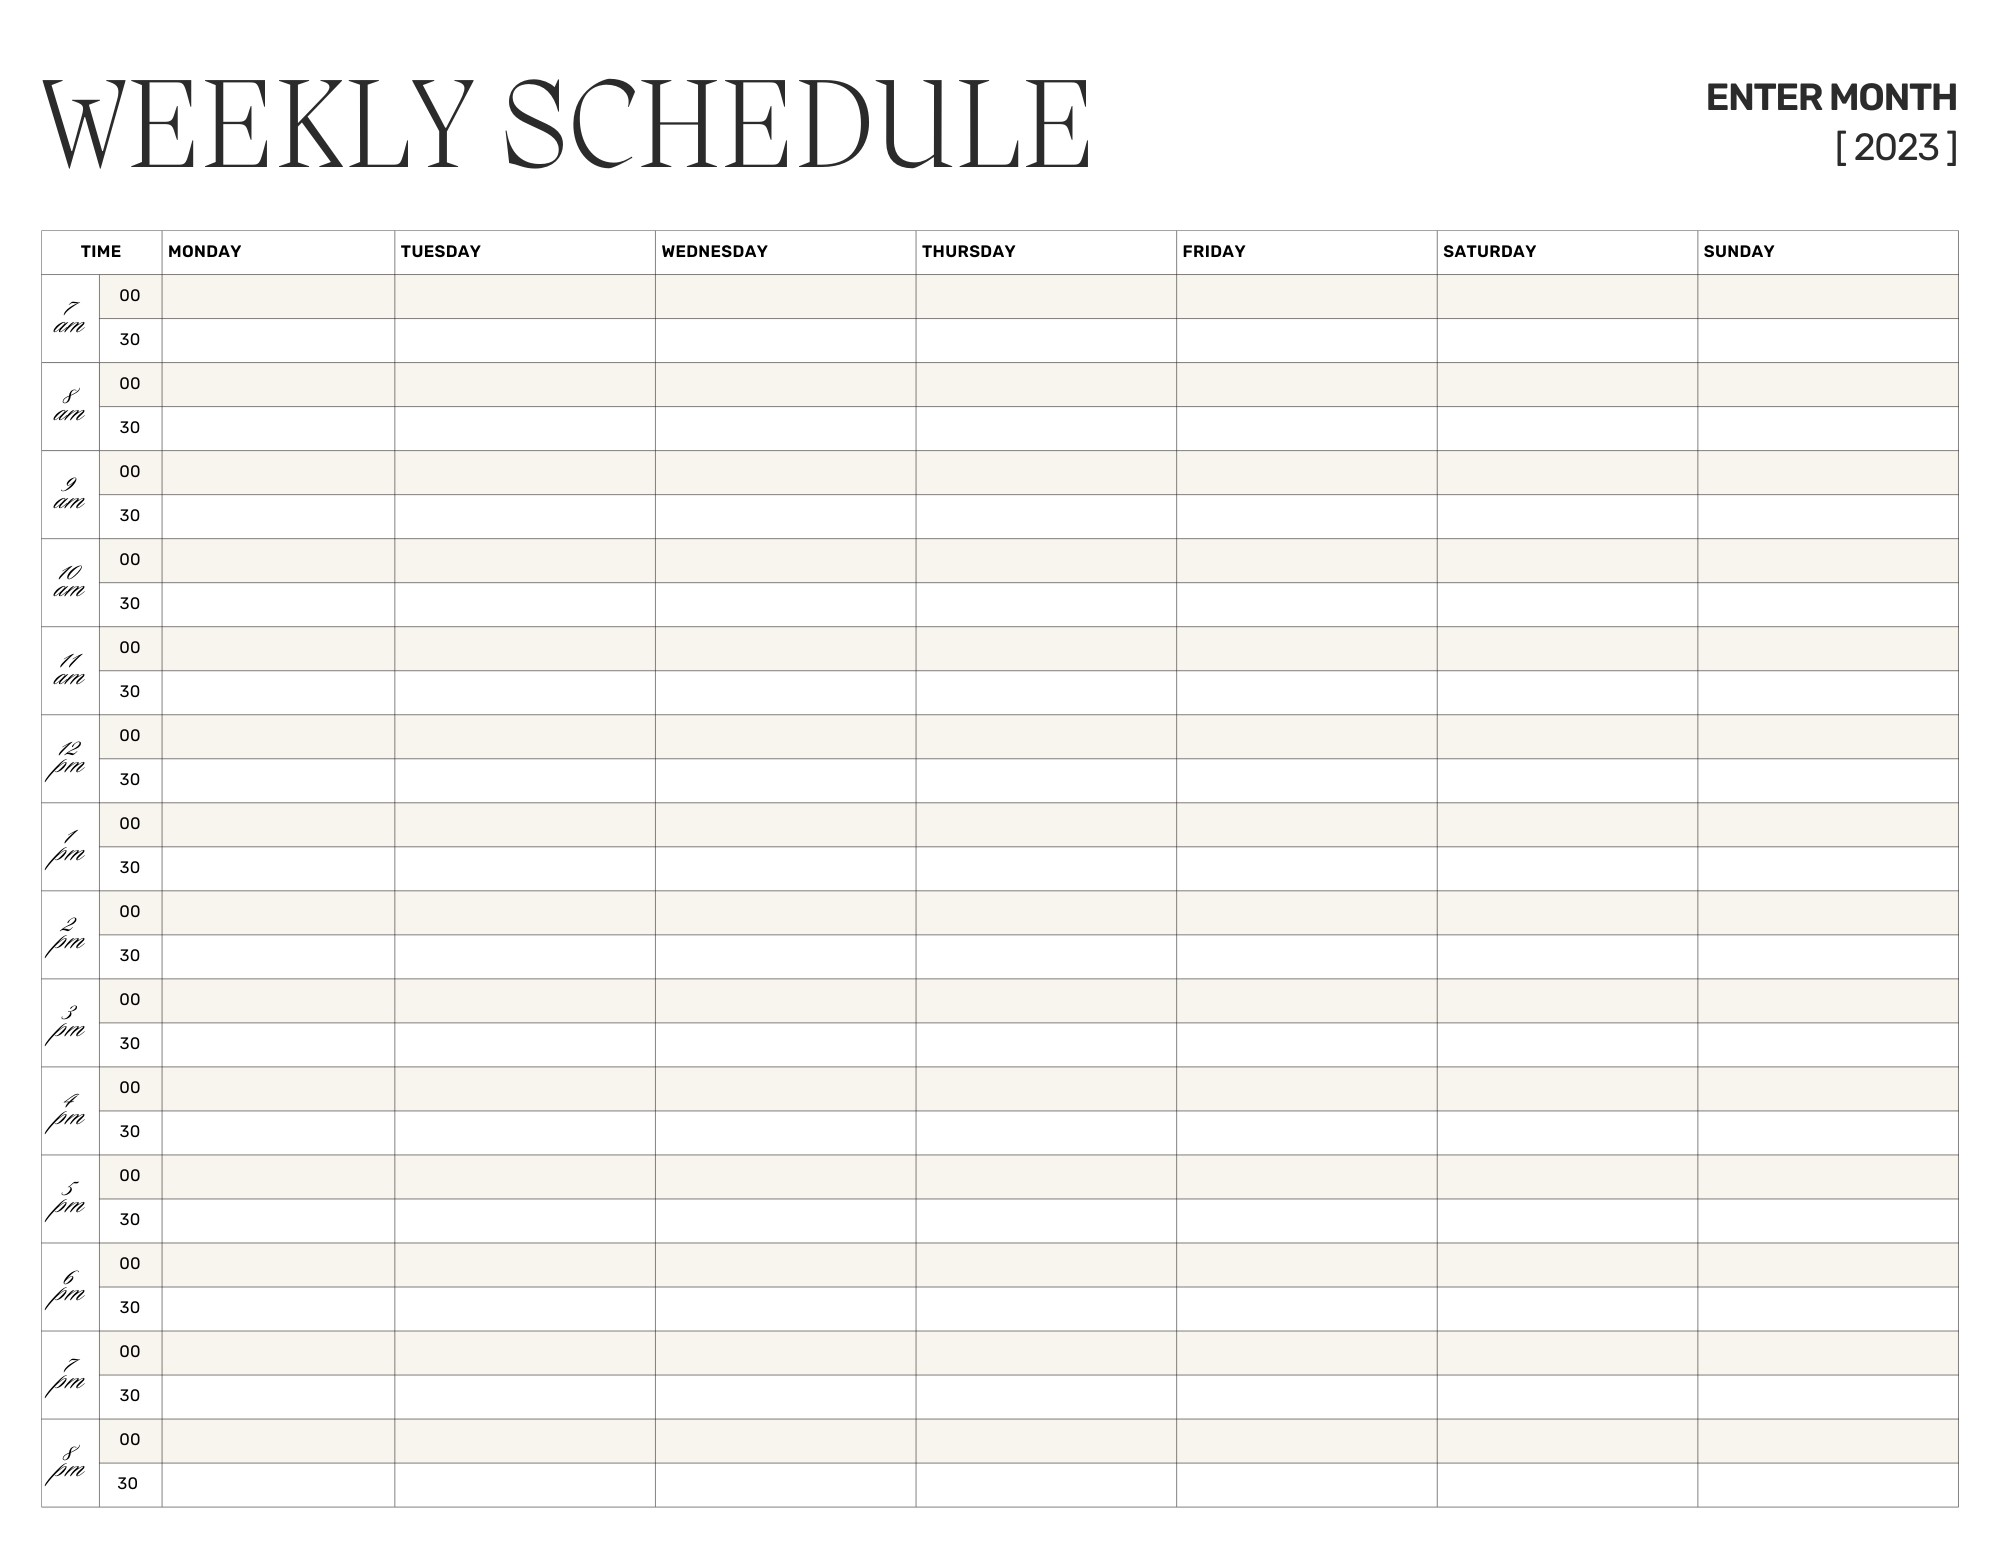 Tailoring Work Schedules for Employees for Different Industries